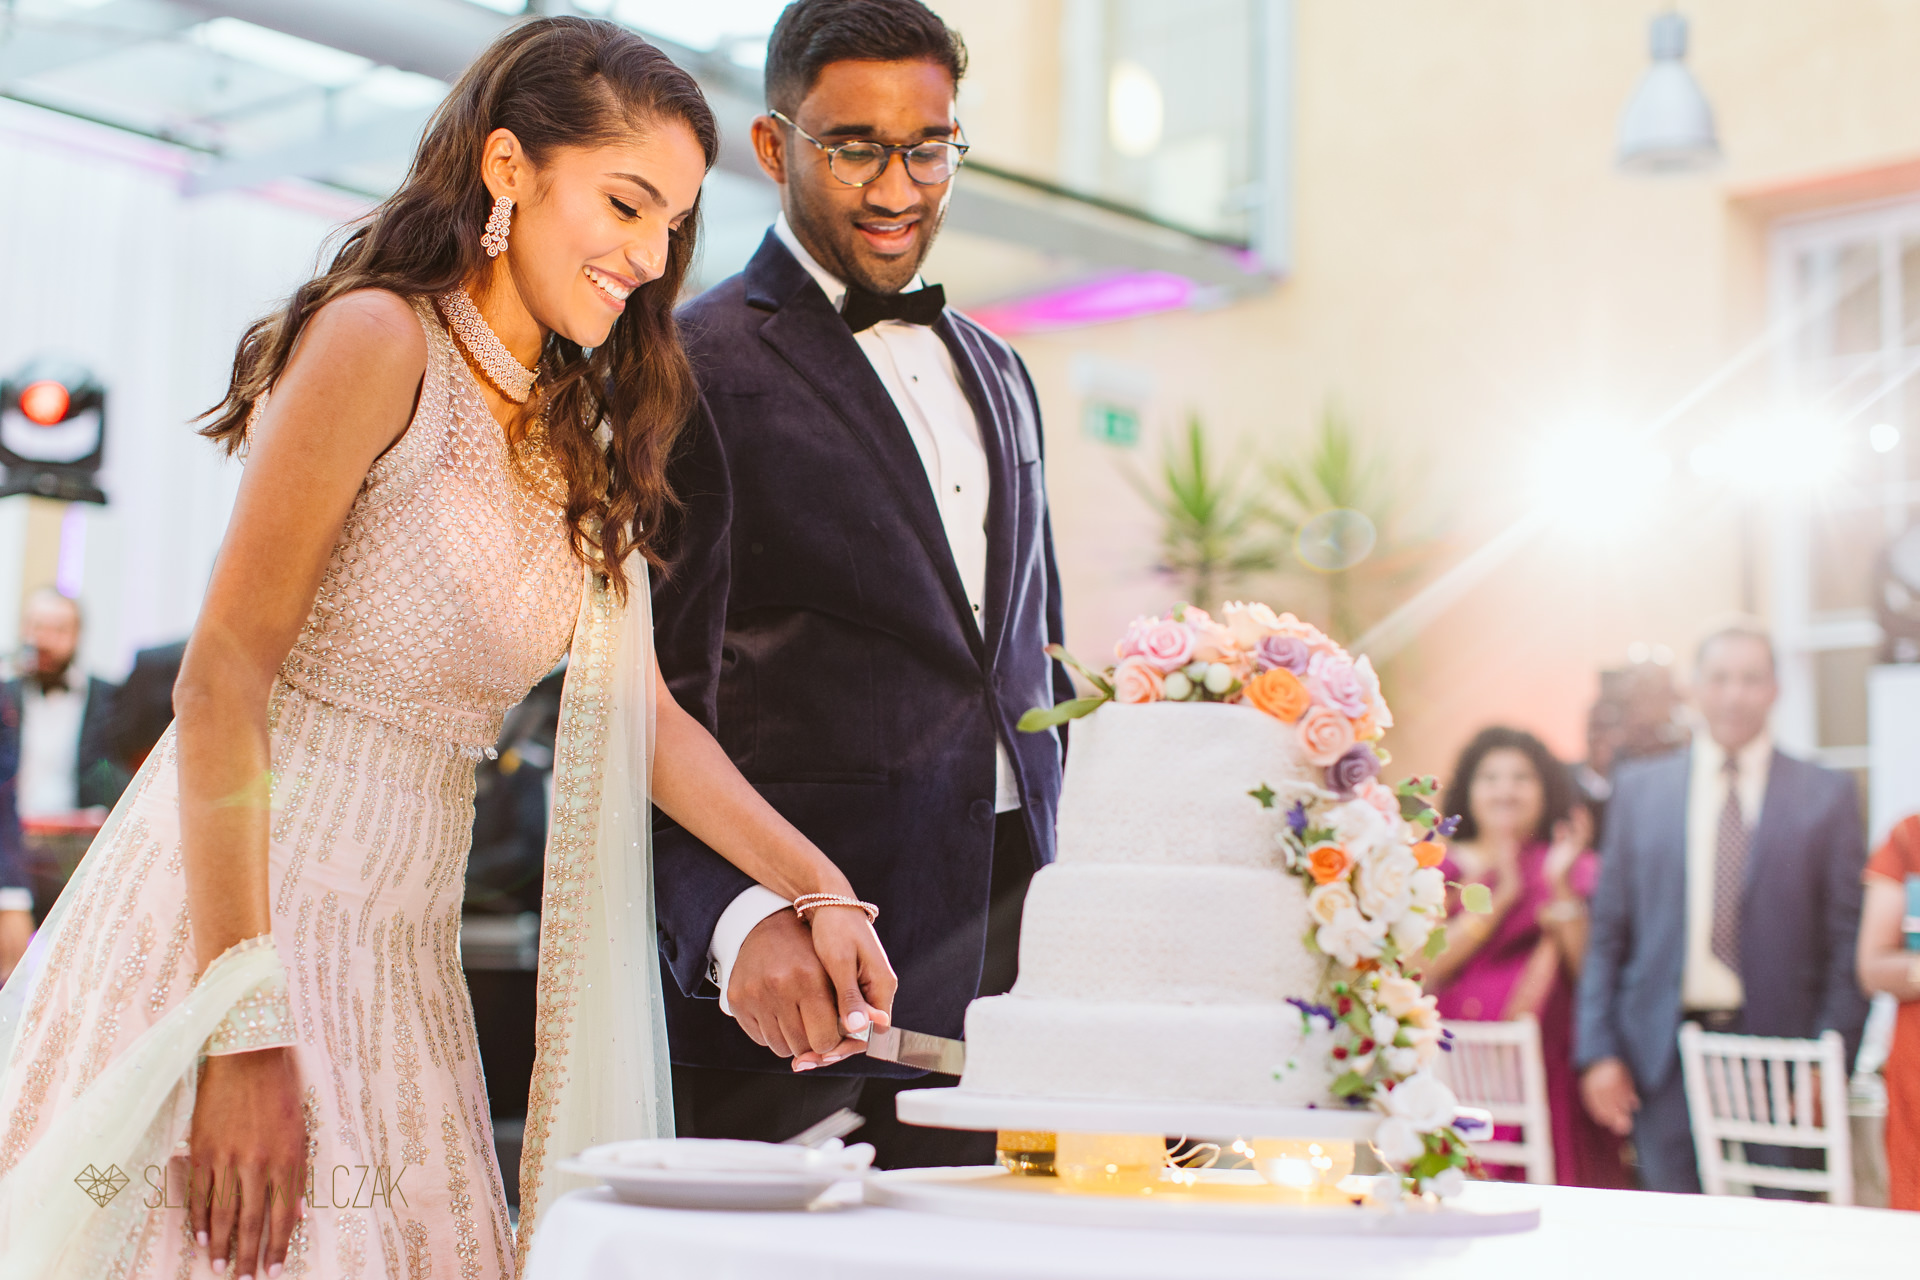 Hindu bride and a groom cut a cake at ther wedding